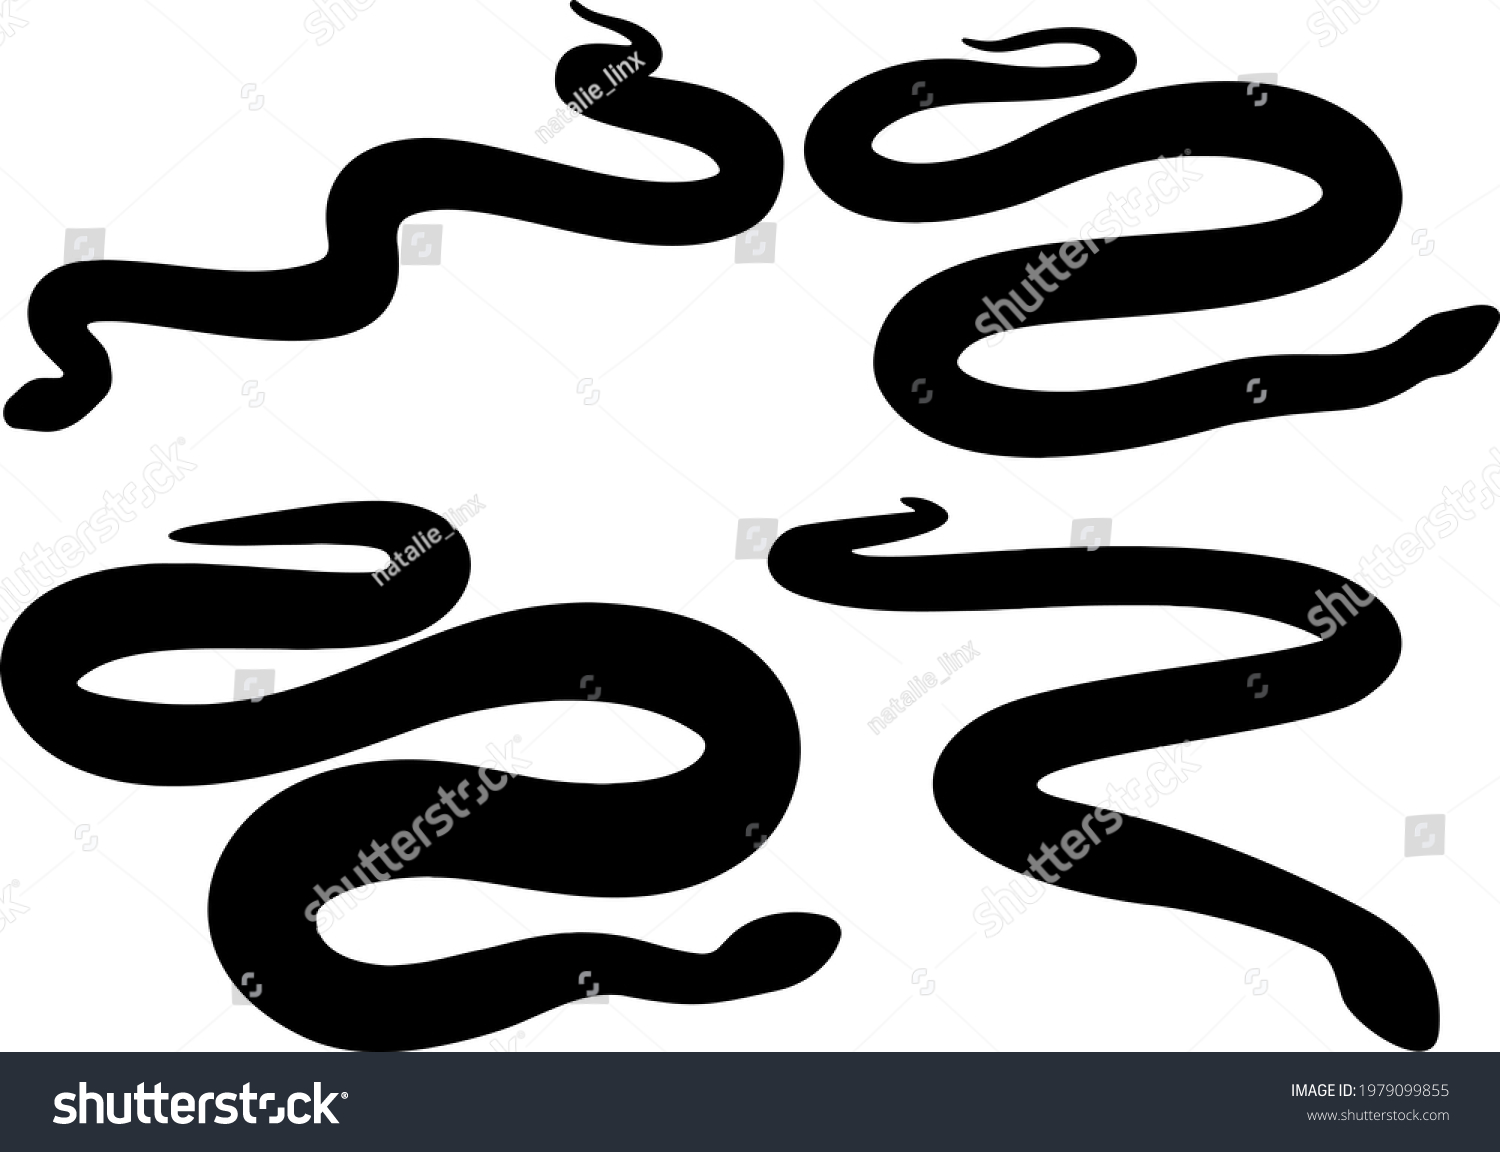 Snakes Pythons Set Vector Image Reptiles Stock Vector Royalty Free Shutterstock